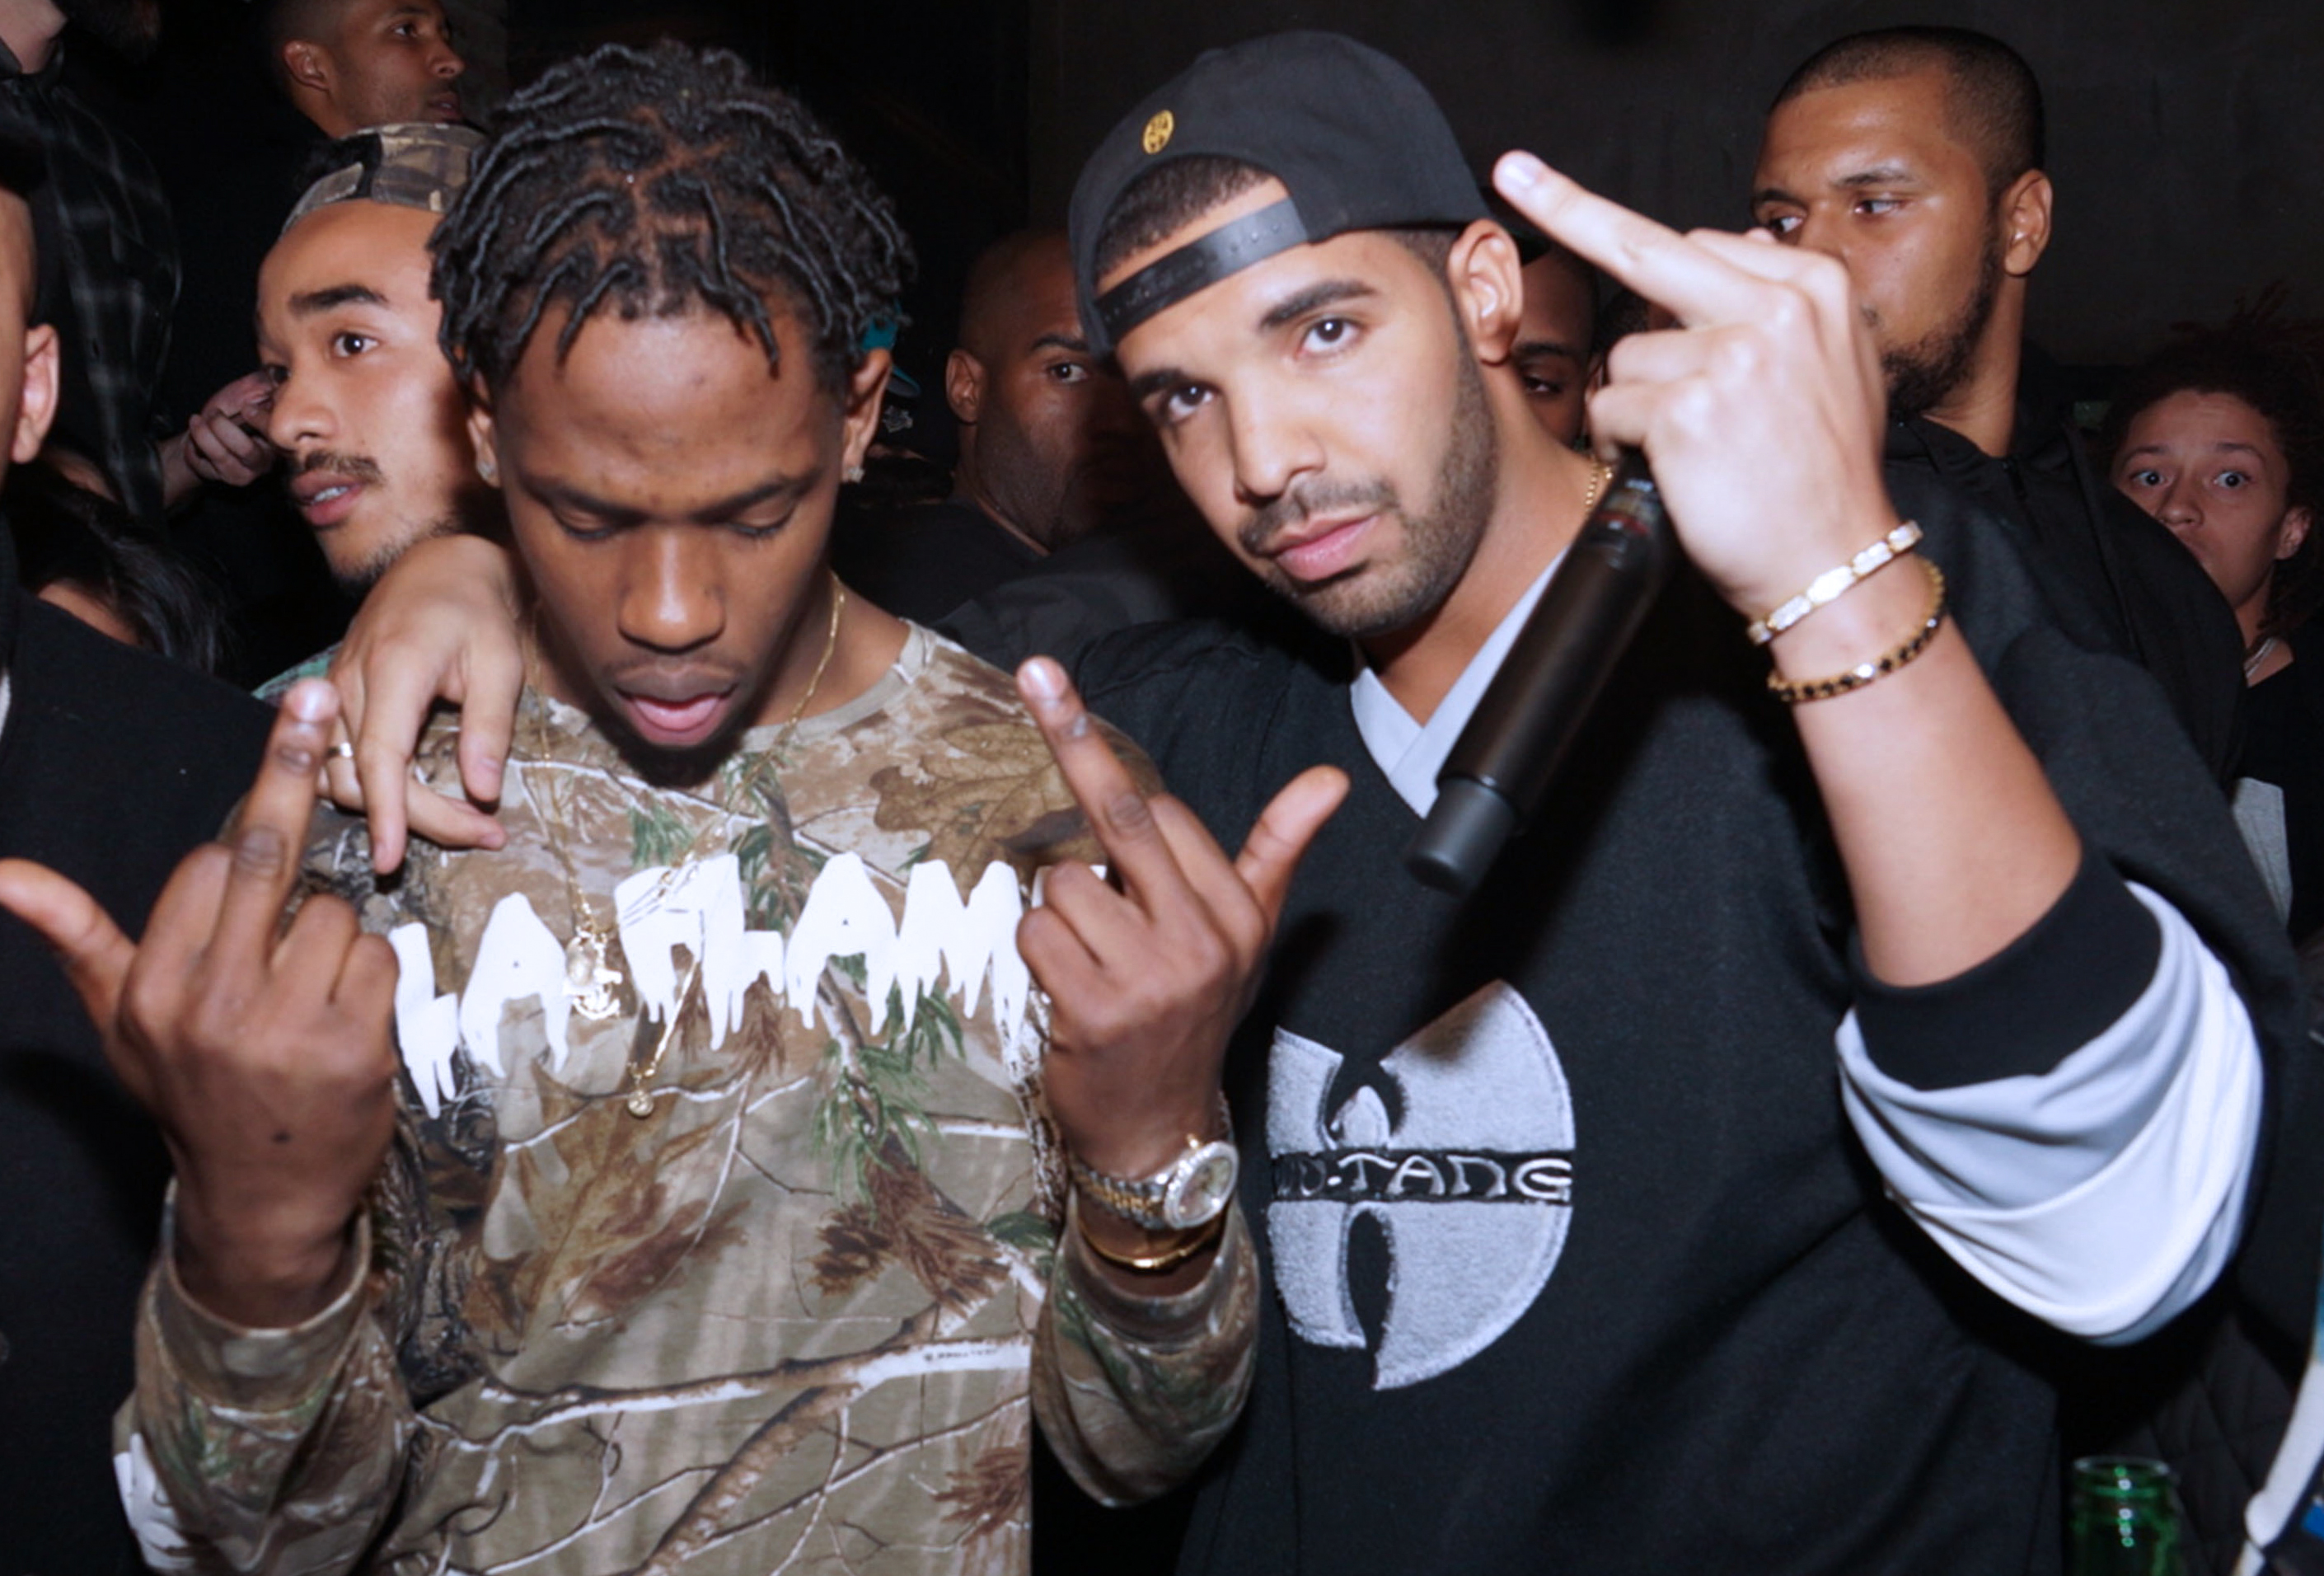 Why Travis Scott's “Sicko Mode,” featuring Drake, is No. 1 on the